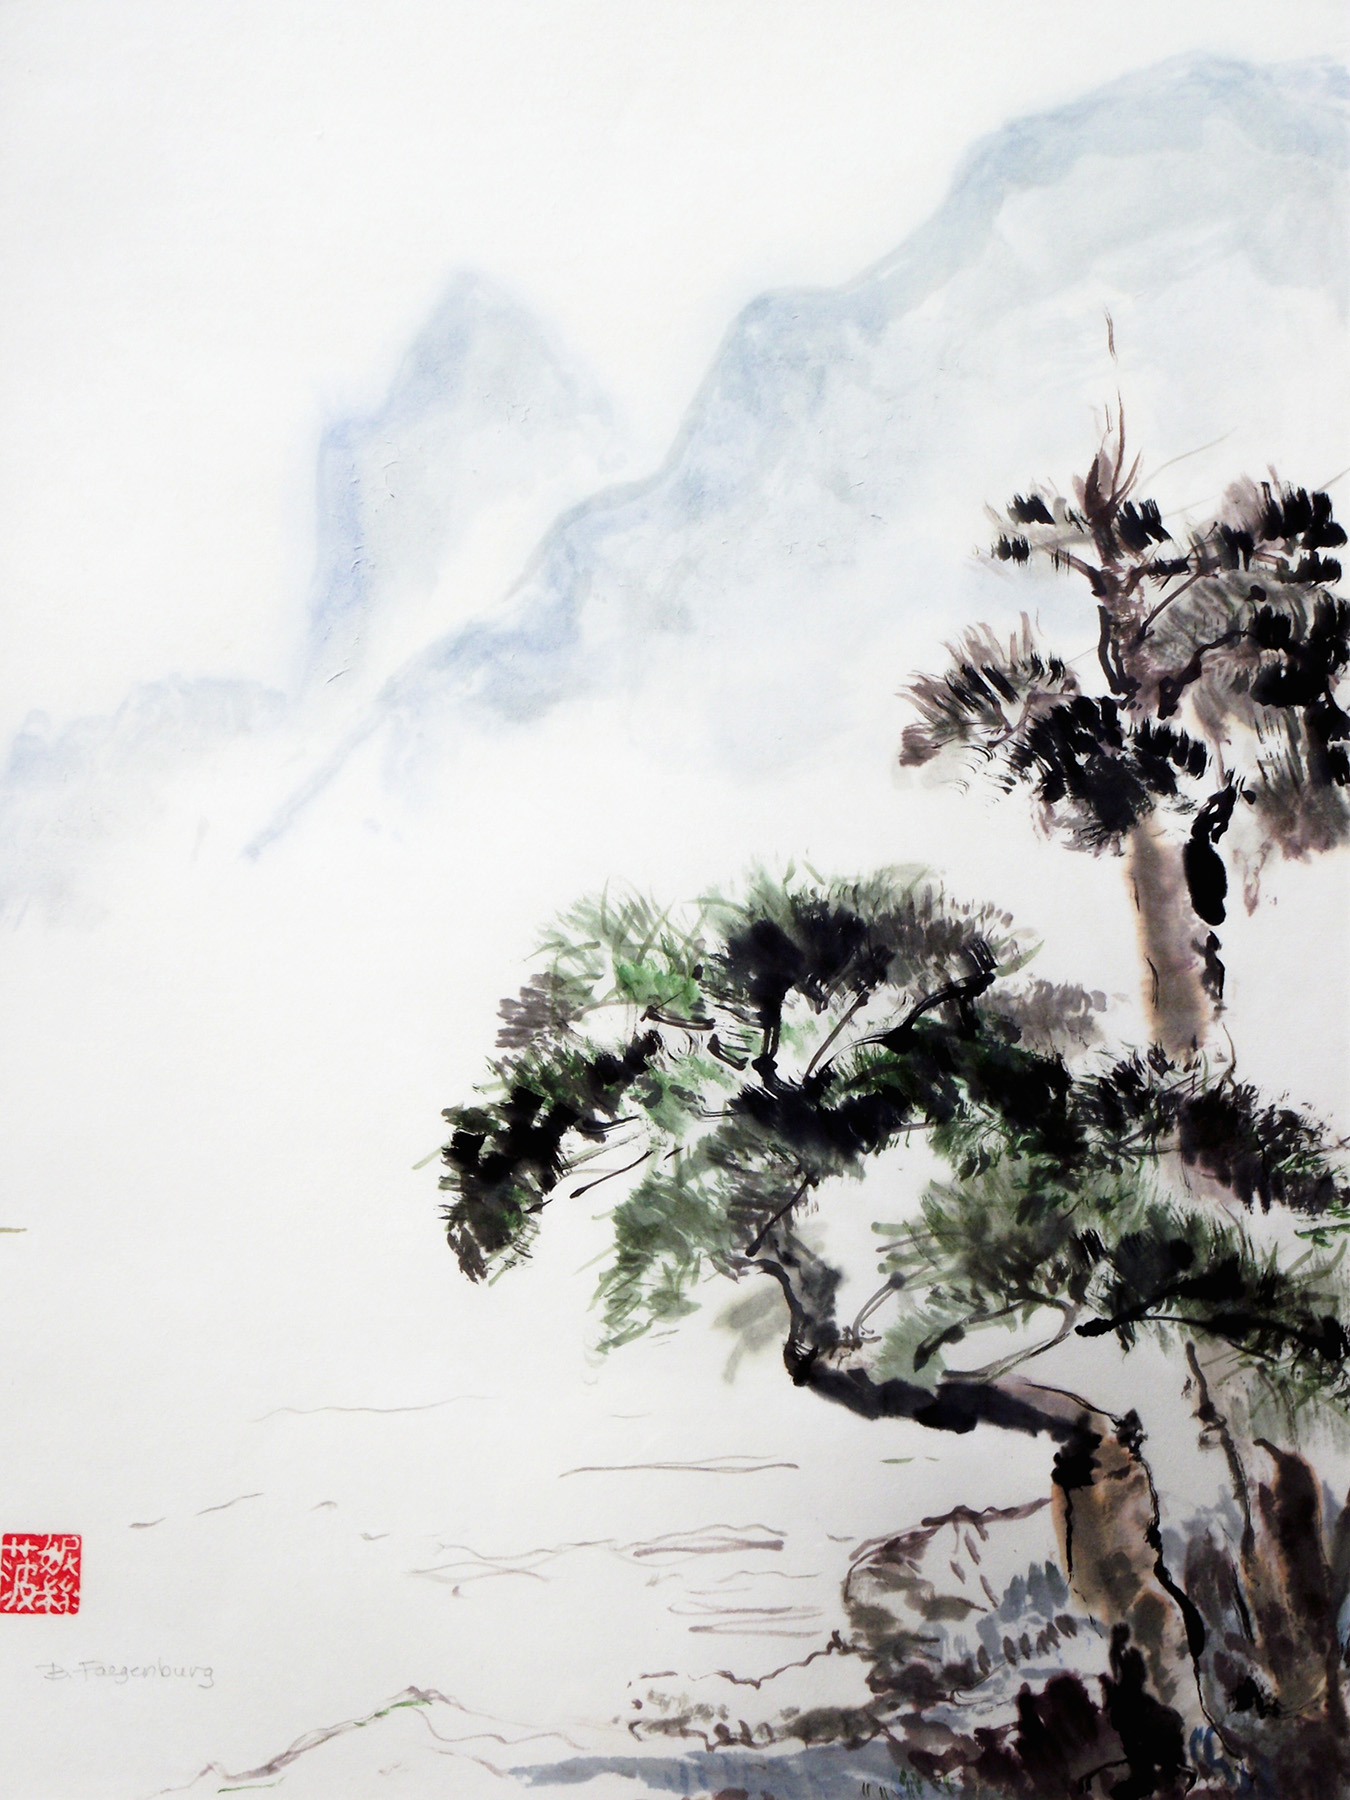  In The Mist, 20x24in, Asian brush painting on rice paper